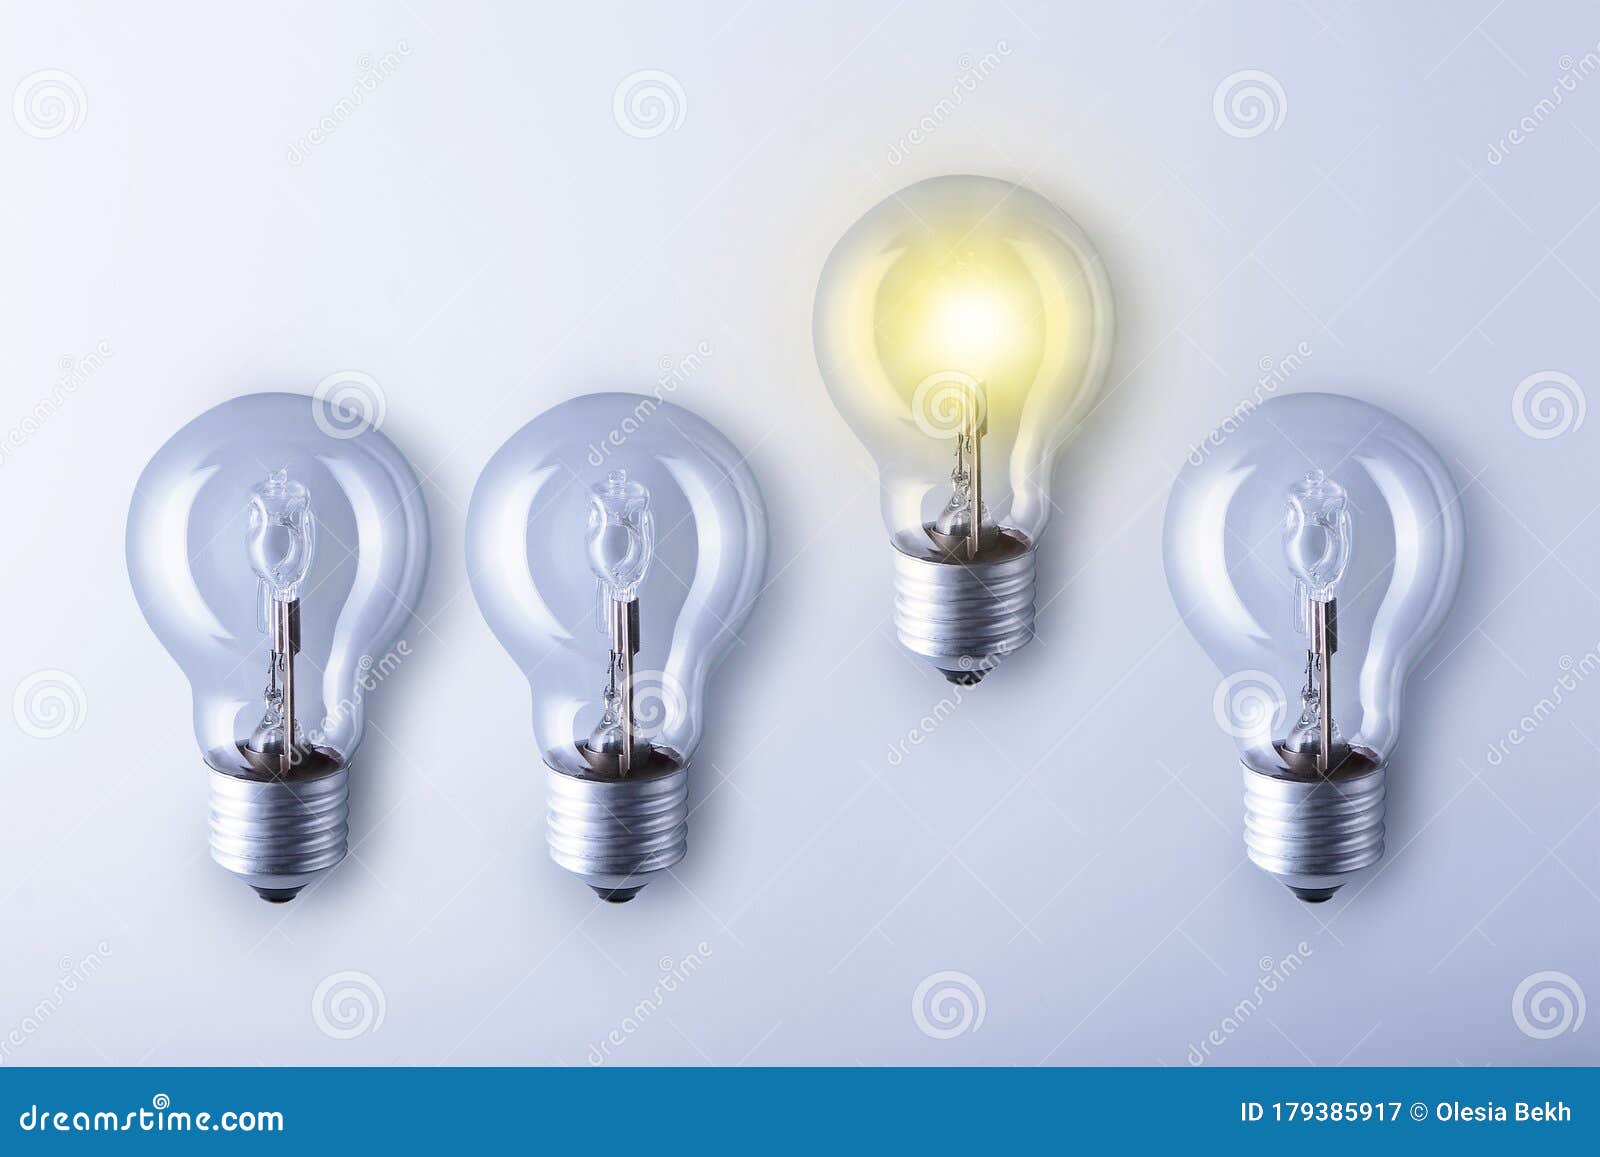 finding innovative solutions and creative ideas, being unique, thinking different concept. group of light bulbs with one glowing